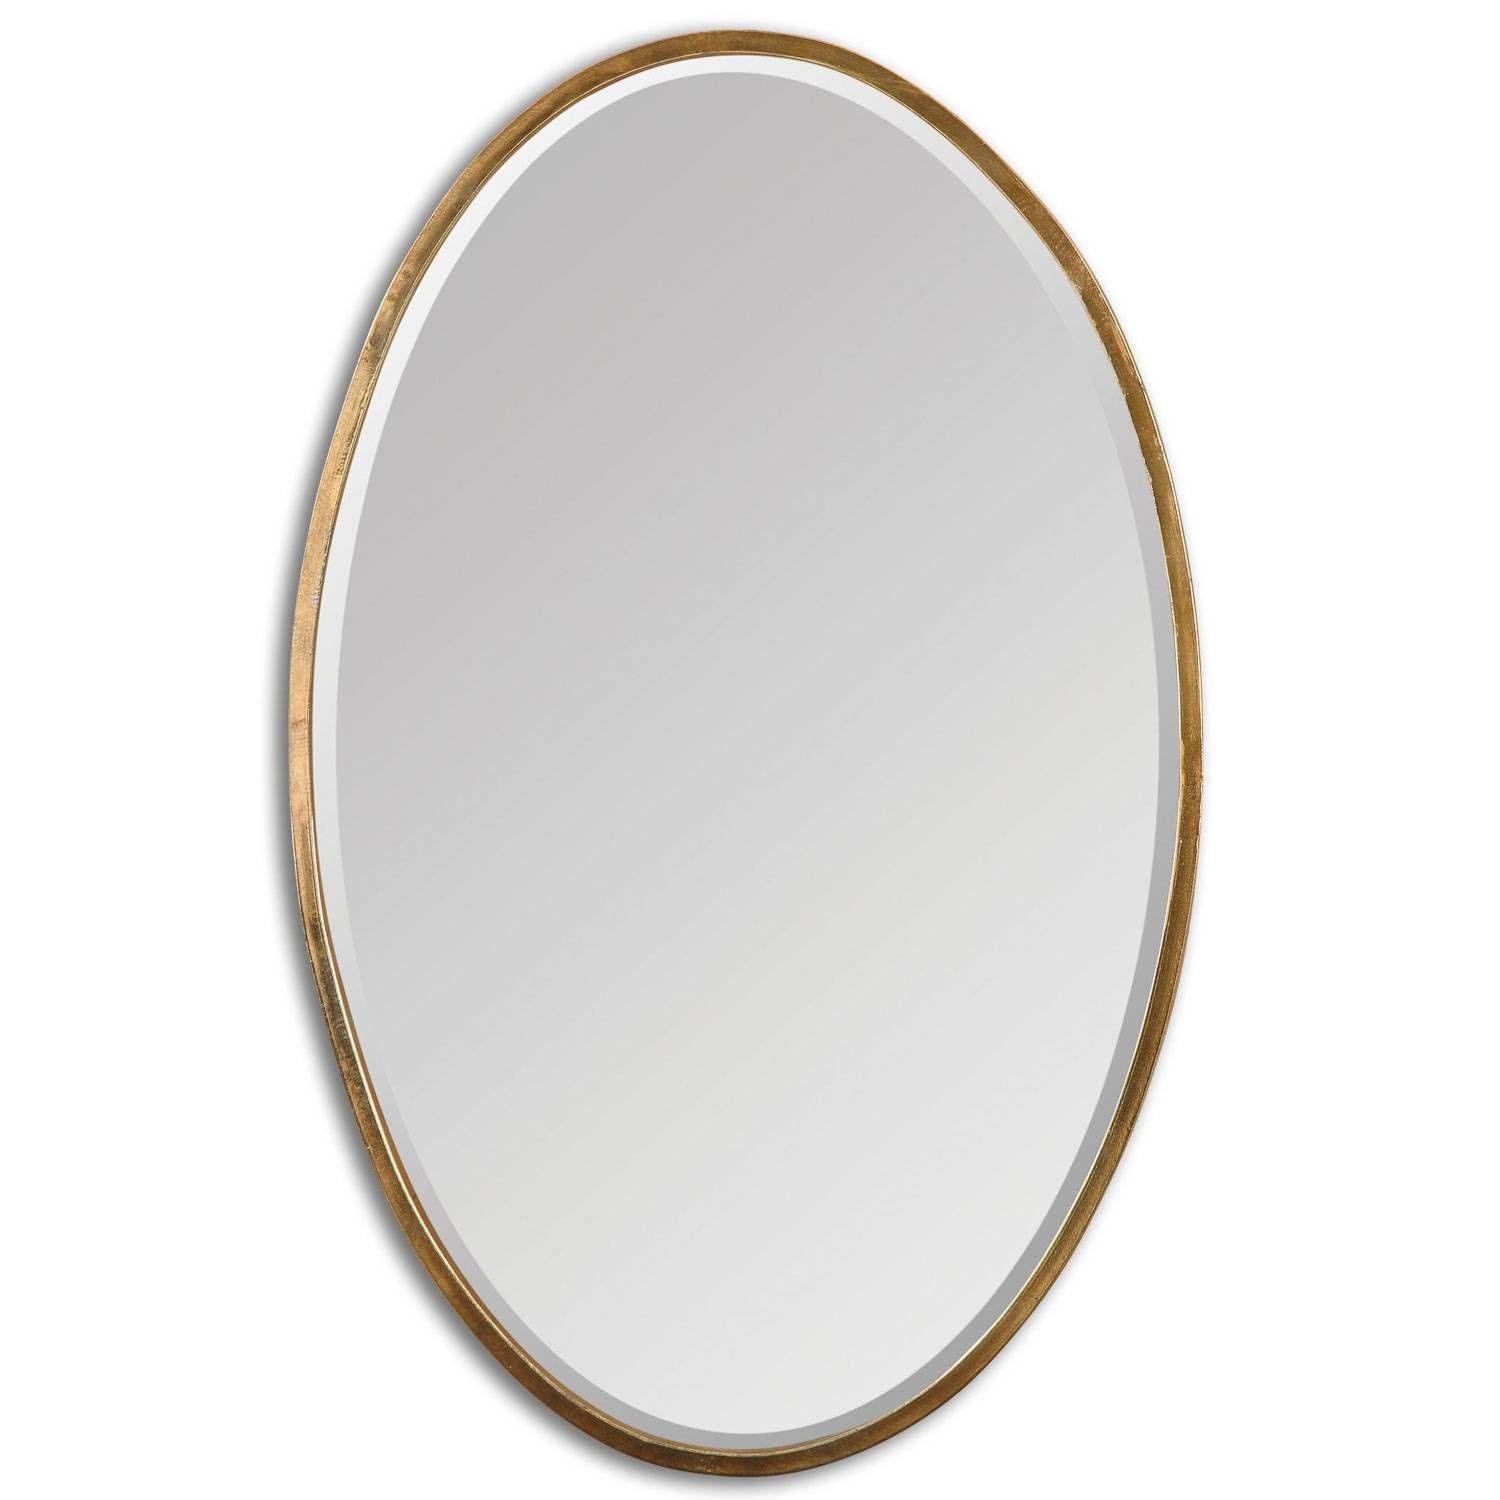 Oval Mirrors | Bellacor Within Long Oval Mirrors (View 6 of 15)